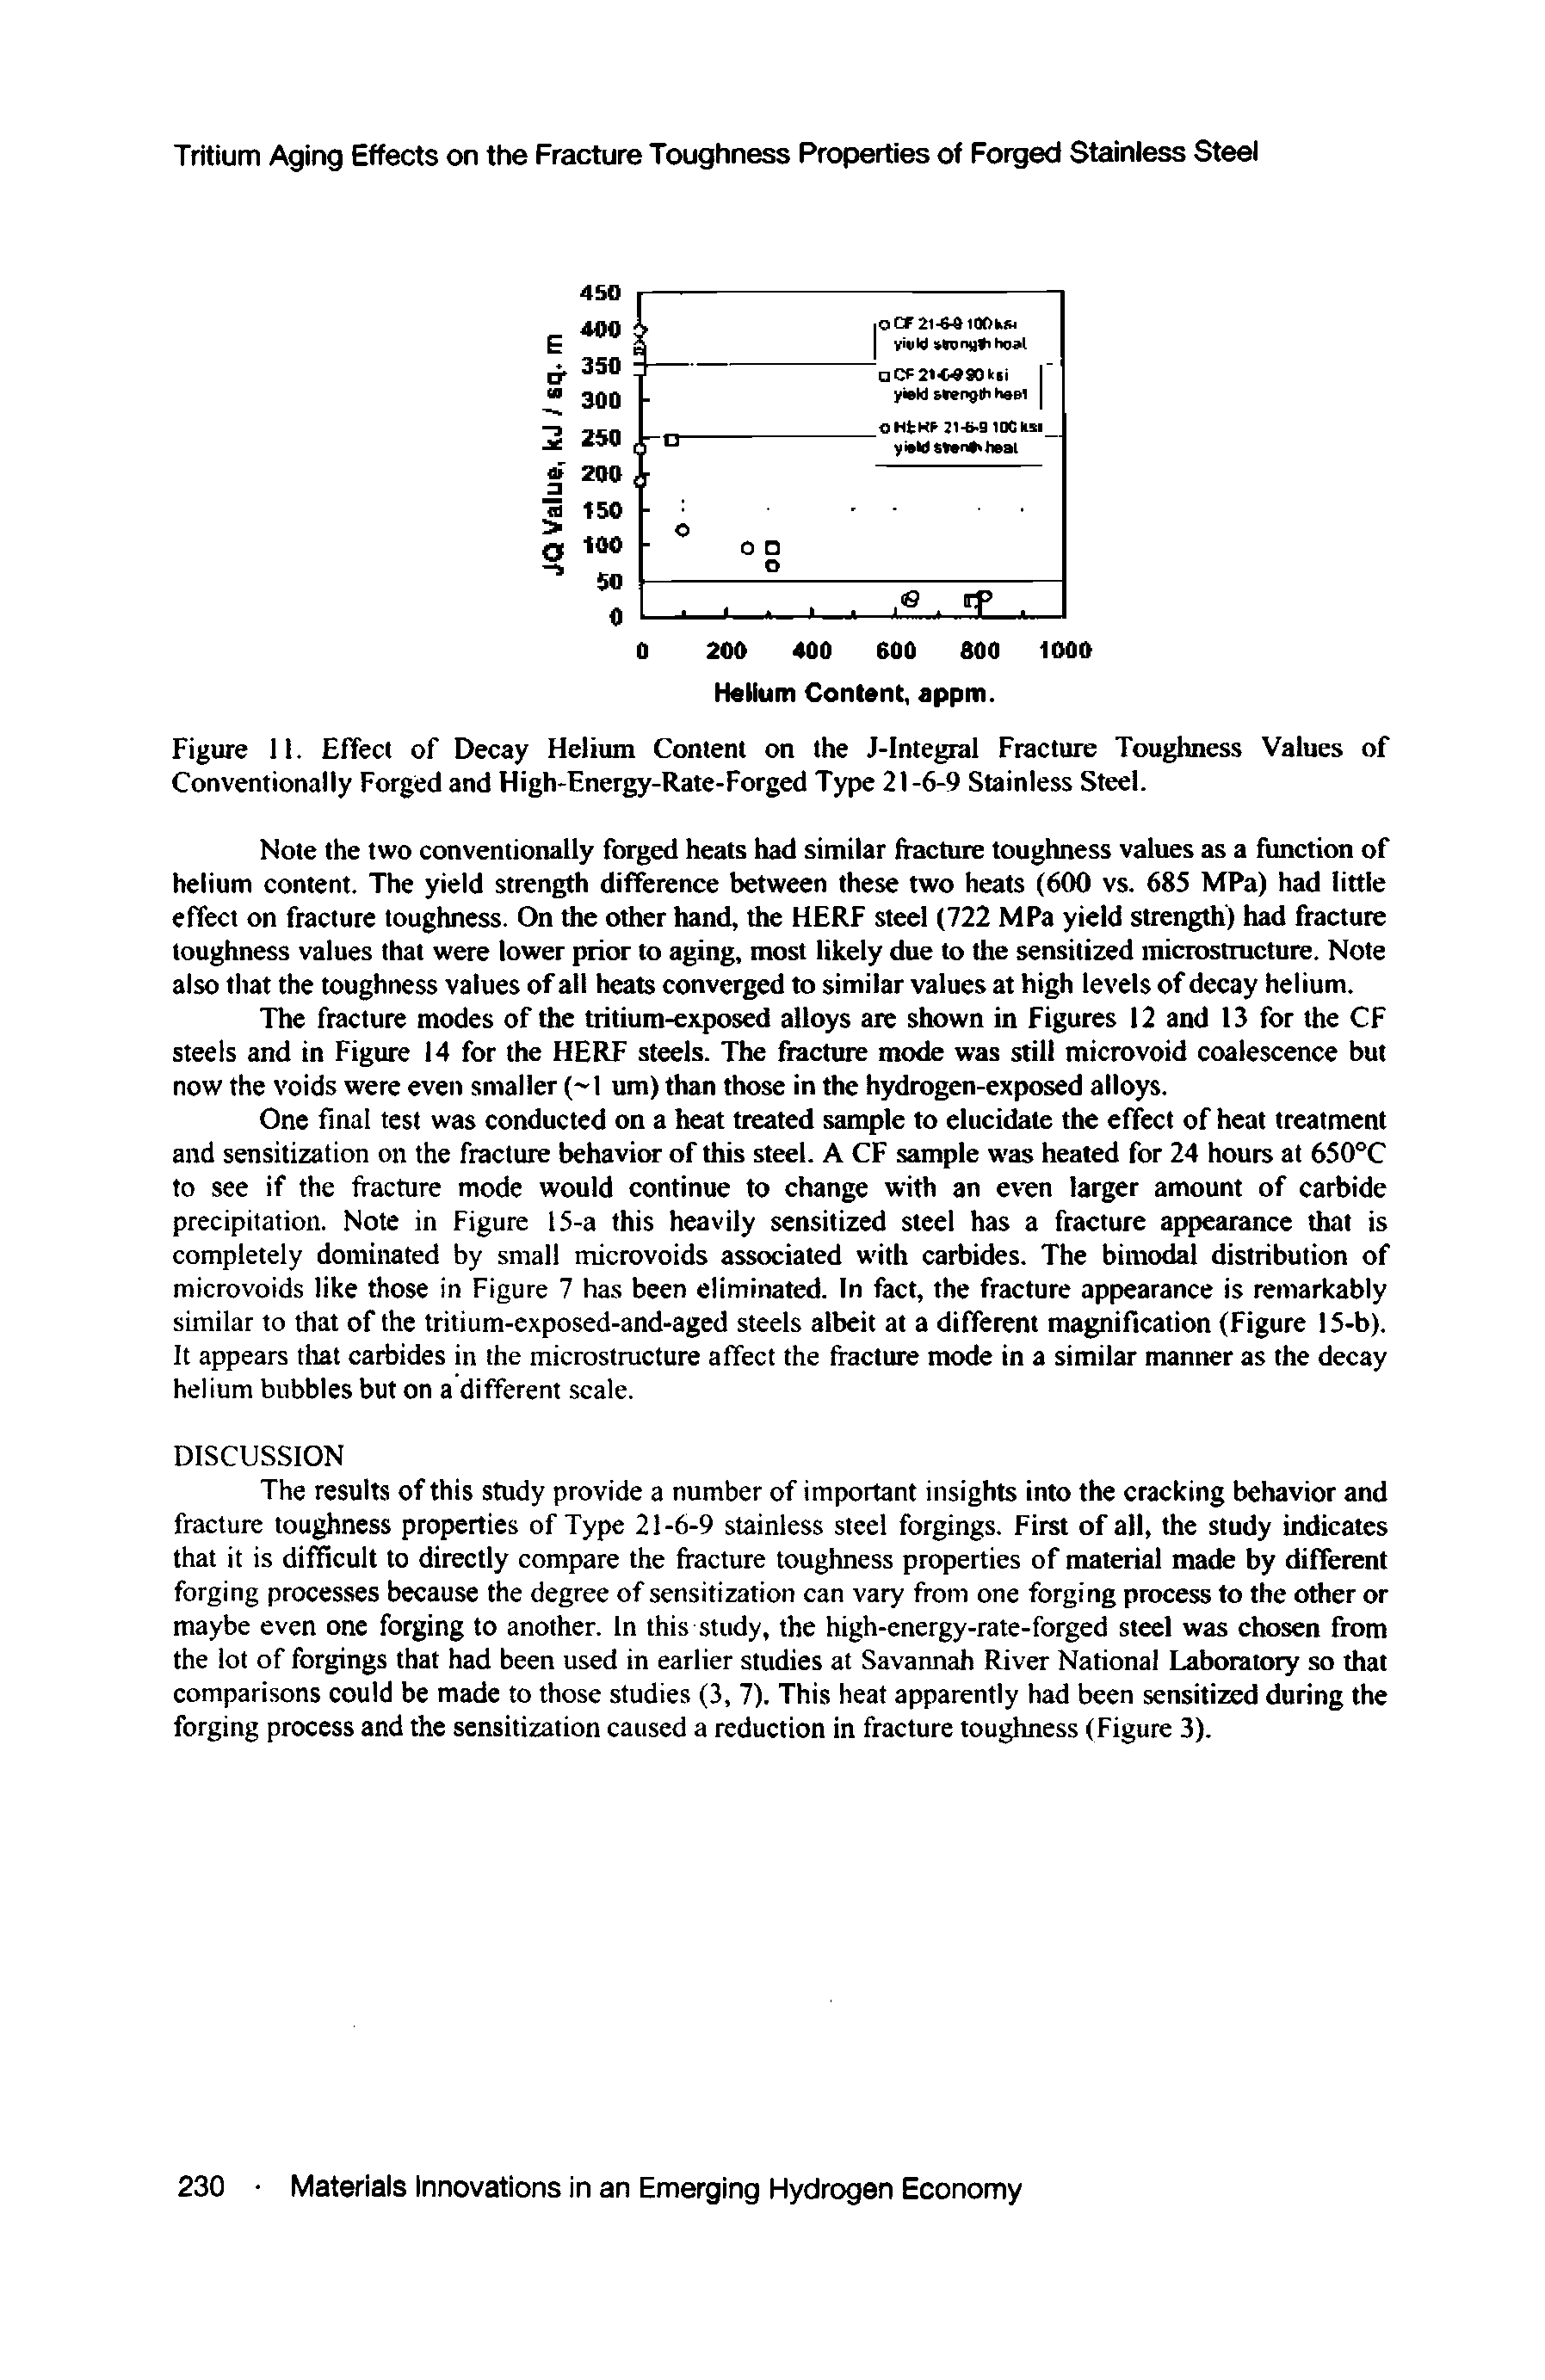 Figure 11. Effect of Decay Helium Content on the J-Integral Fracture Toughness Values of Conventionally Forged and High-Energy-Rate-Forged Type 21-6-9 Stainless Steel.